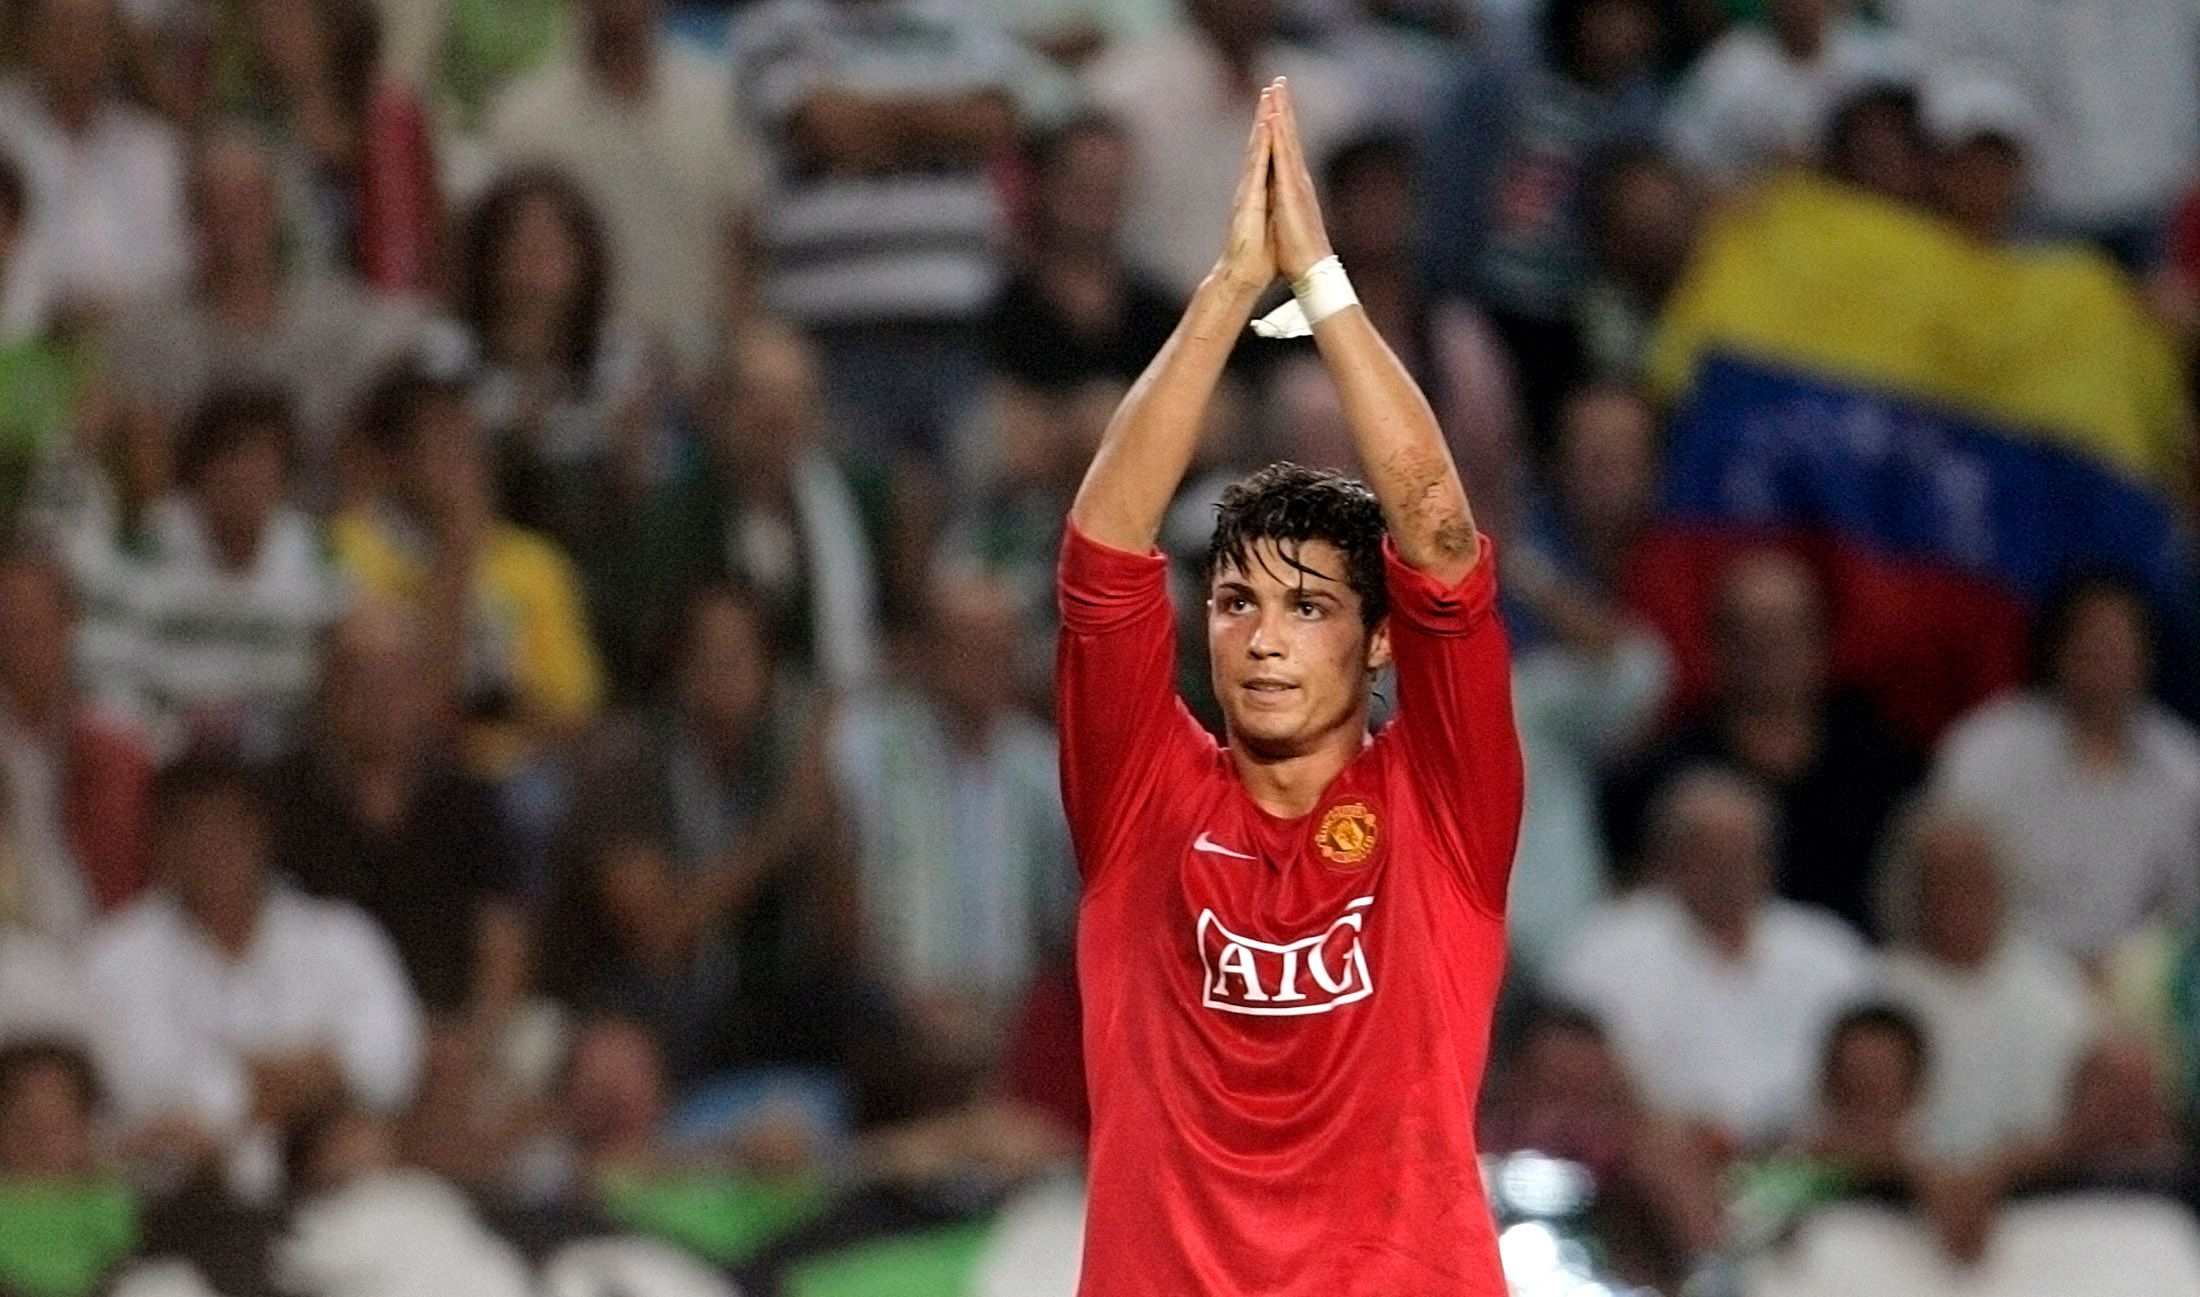 Manchester United's Cristiano Ronaldo celebrates his goal against Sporting during their Champions League Group F soccer match at Alvalade stadium in Lisbon September 19, 2007. REUTERS/Nacho Doce (PORTUGAL)